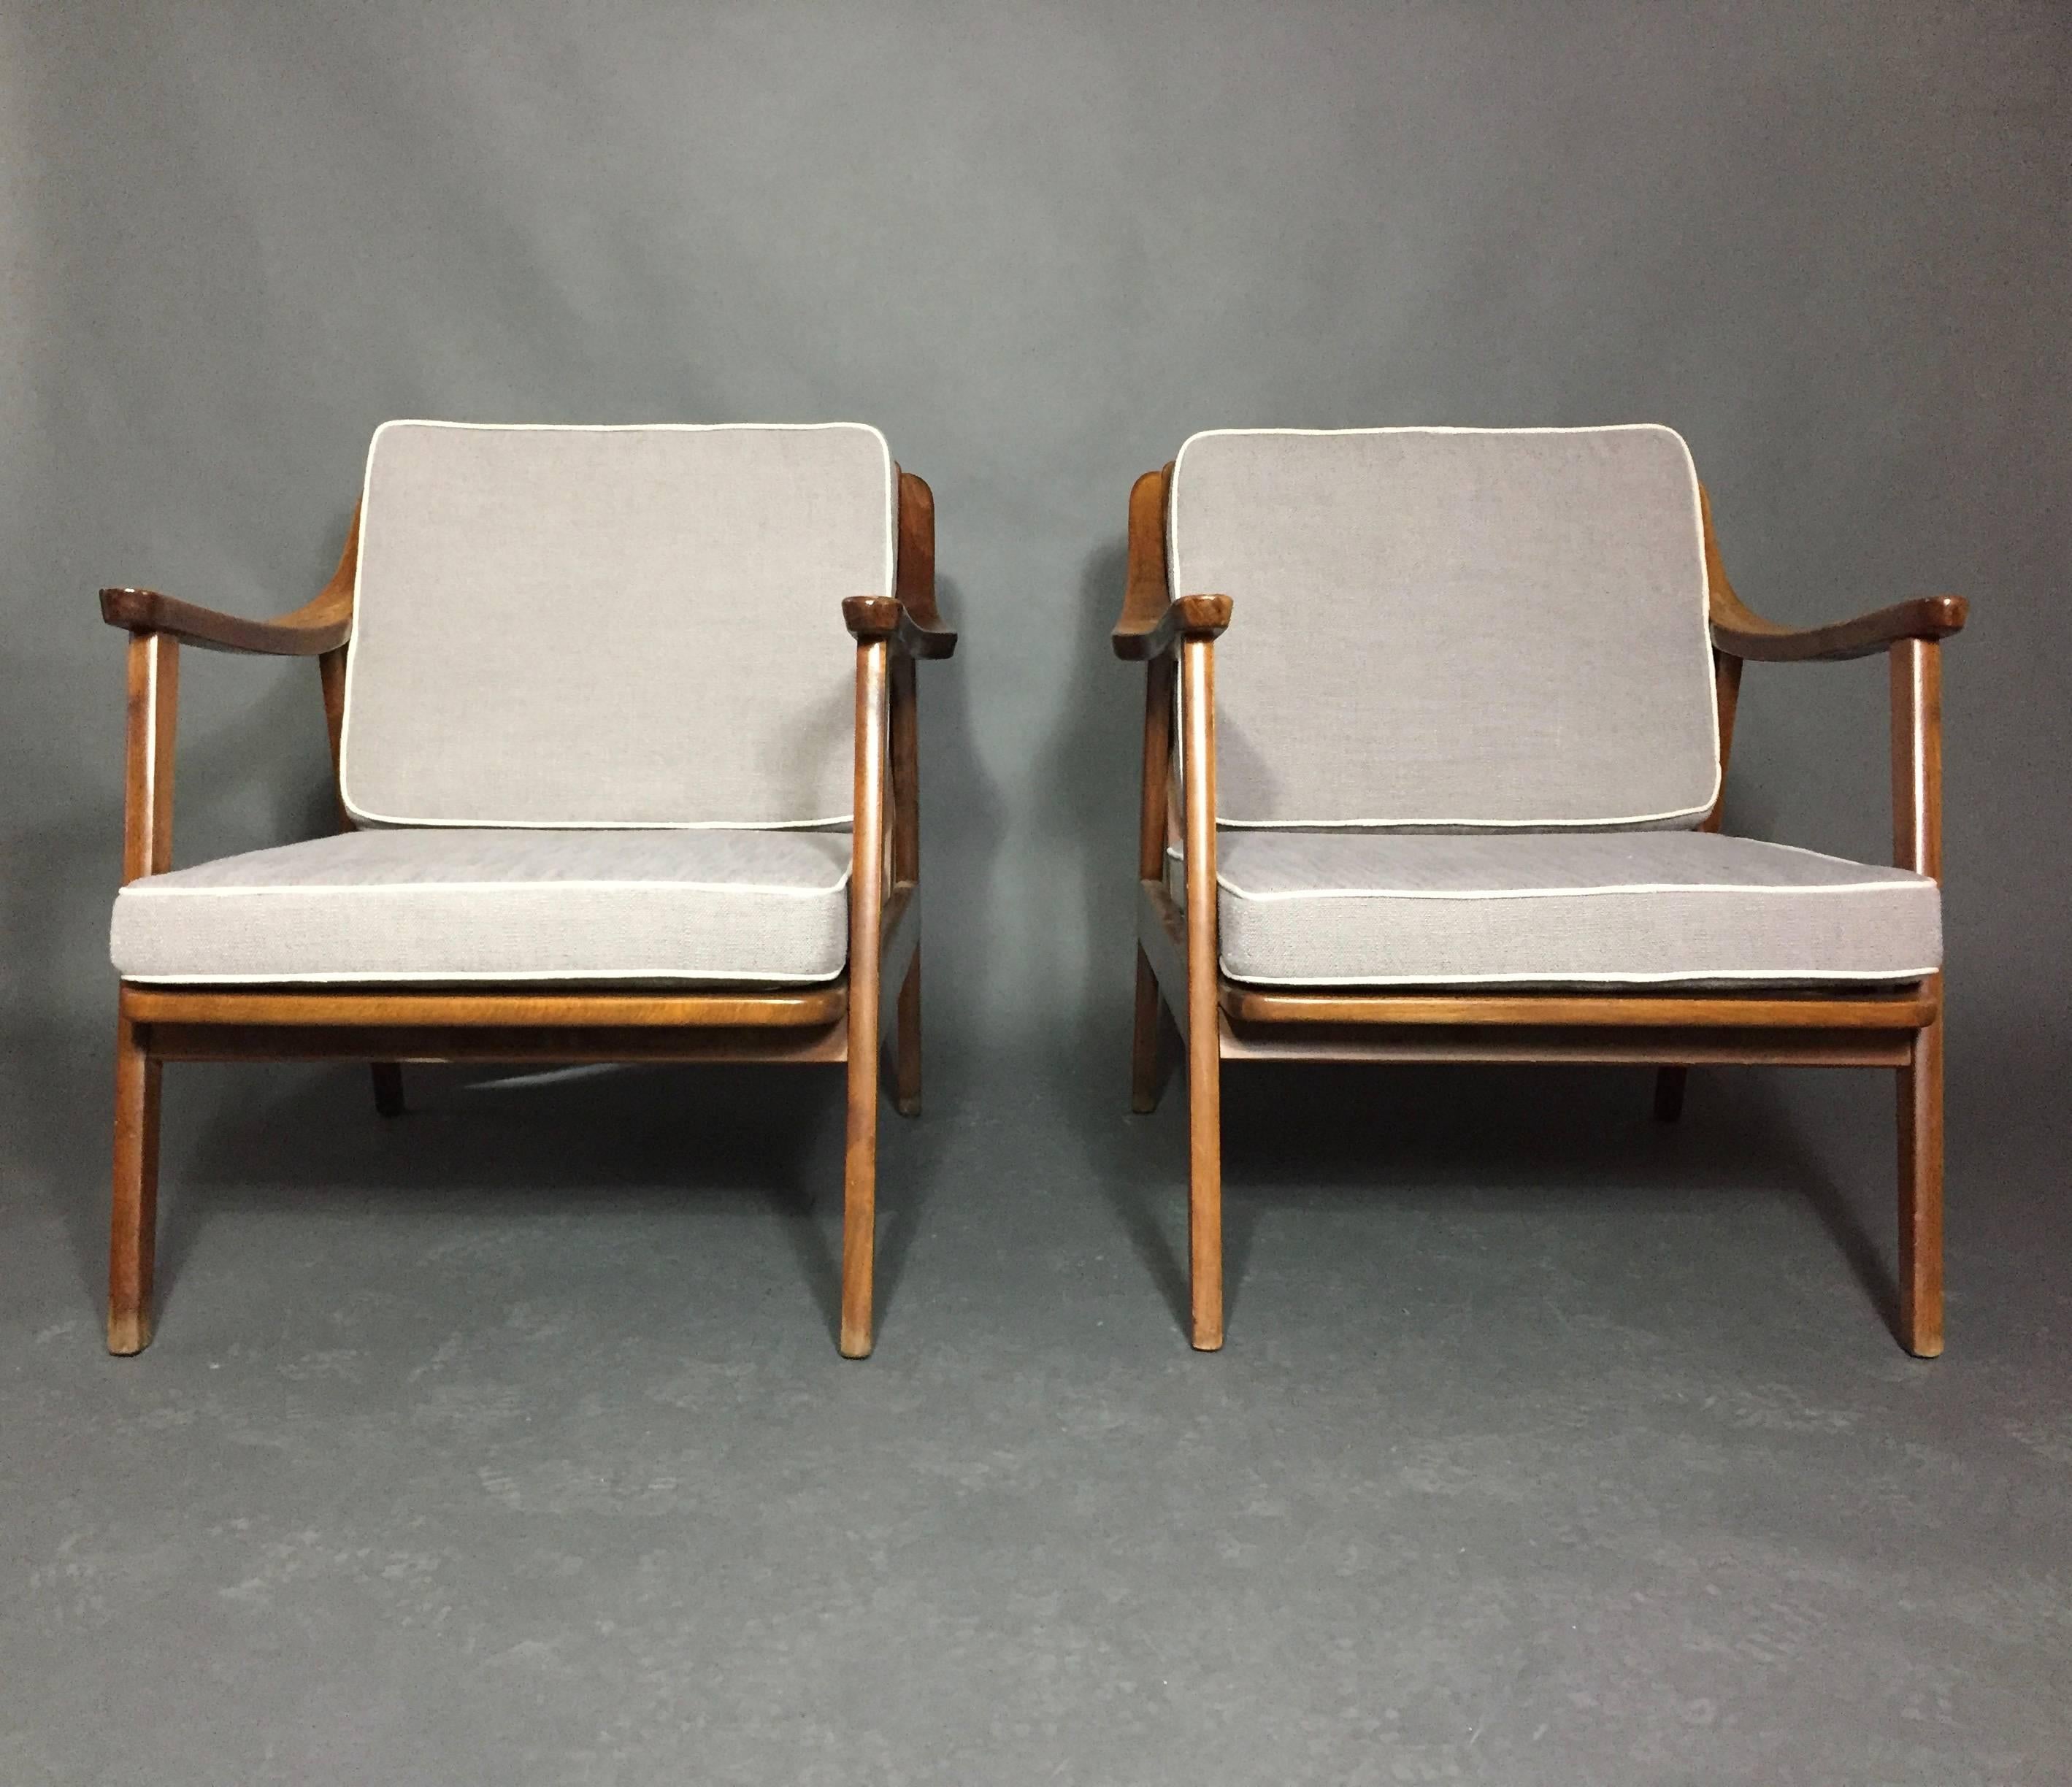 Well proportioned and nicely shaped pair of American Modern lounge chairs from the 1960s with open and angled slat backs. We left the wood in vintage condition as we love the patina of the chairs frames against the new light grey upholstered covers